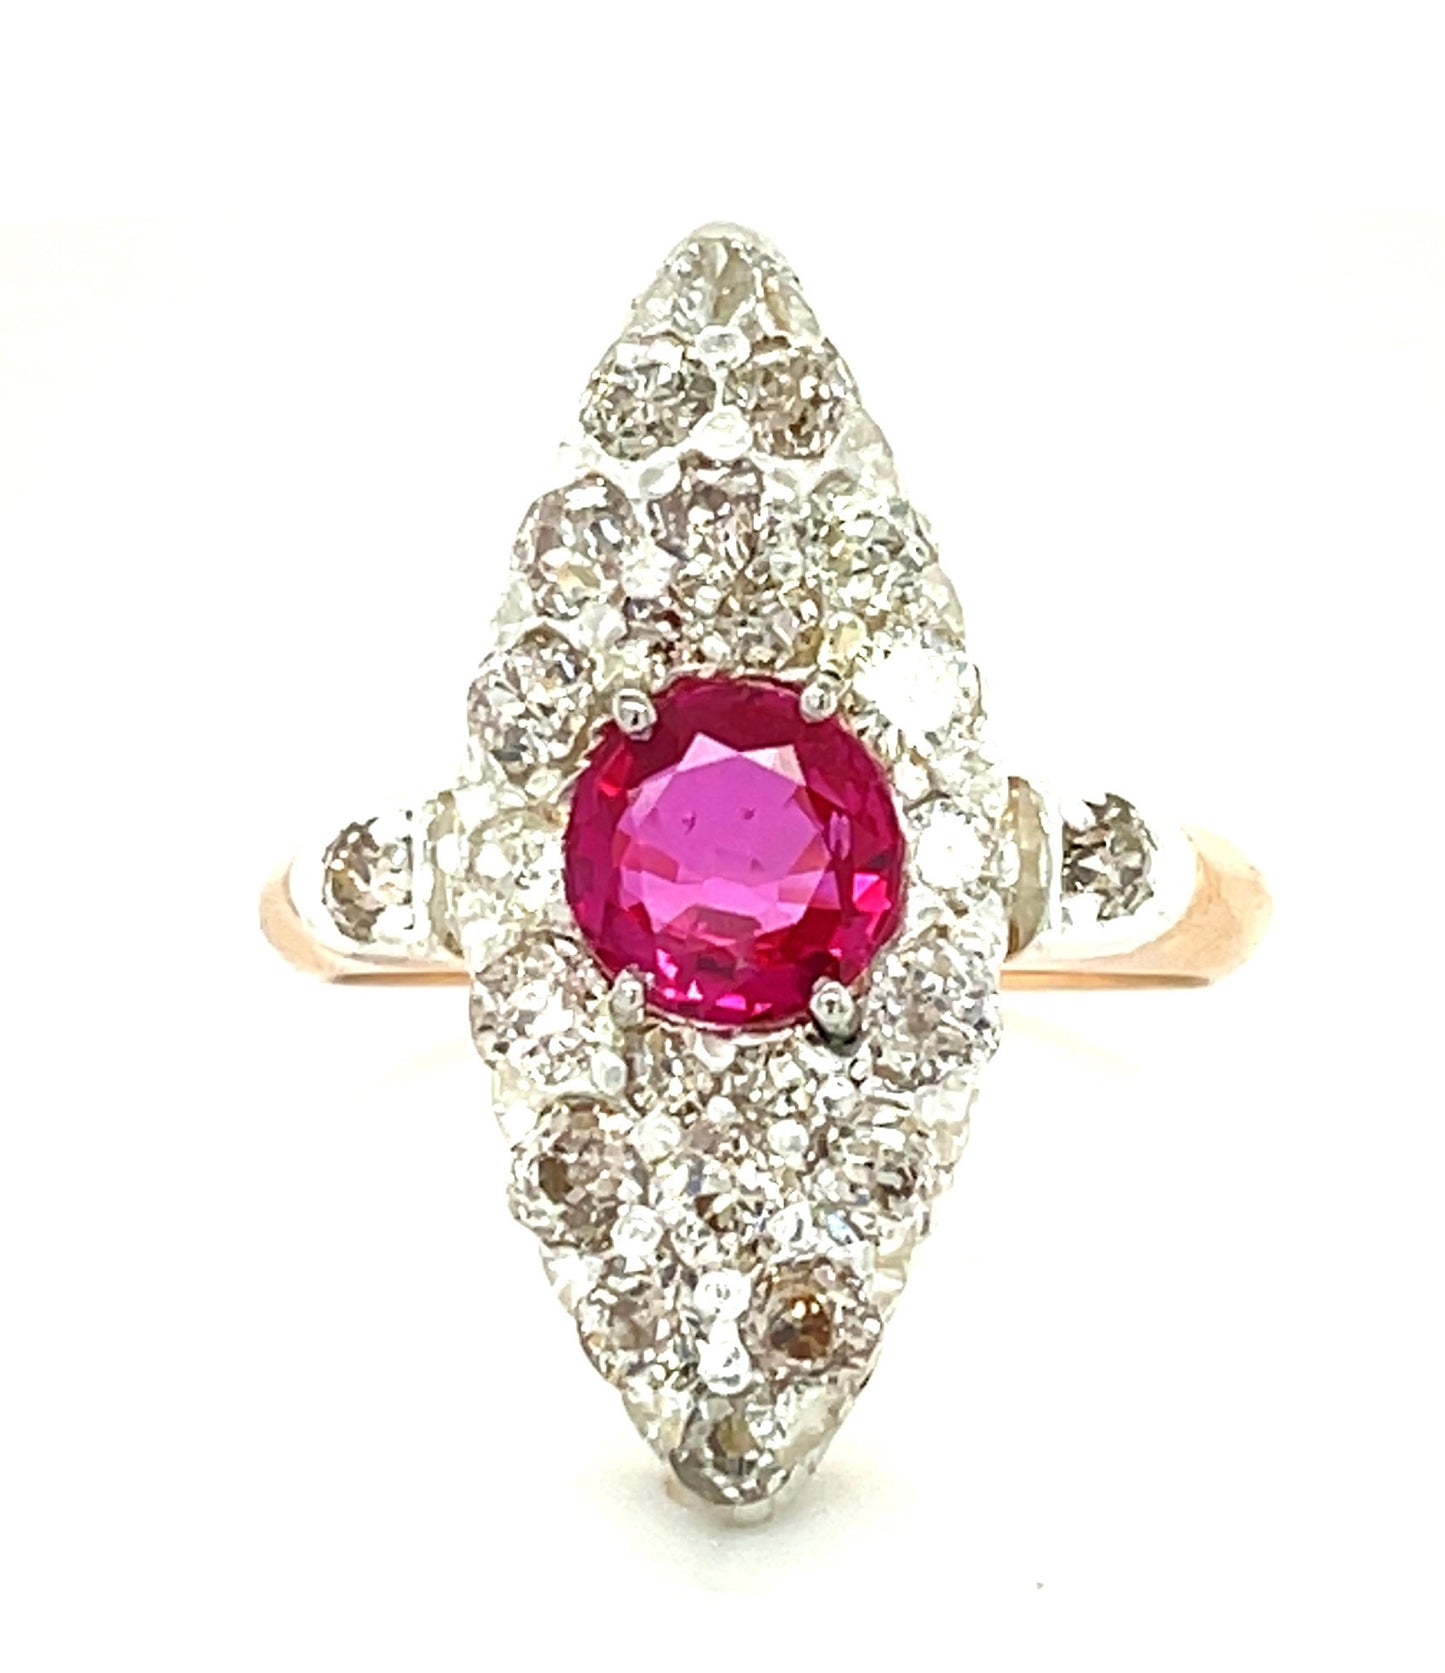 .80ct Ruby 1.25ct Old European Cut Diamond 14K+Silver Victorian Antique Ring (Circa 1880s) 7 Size 4.40gr